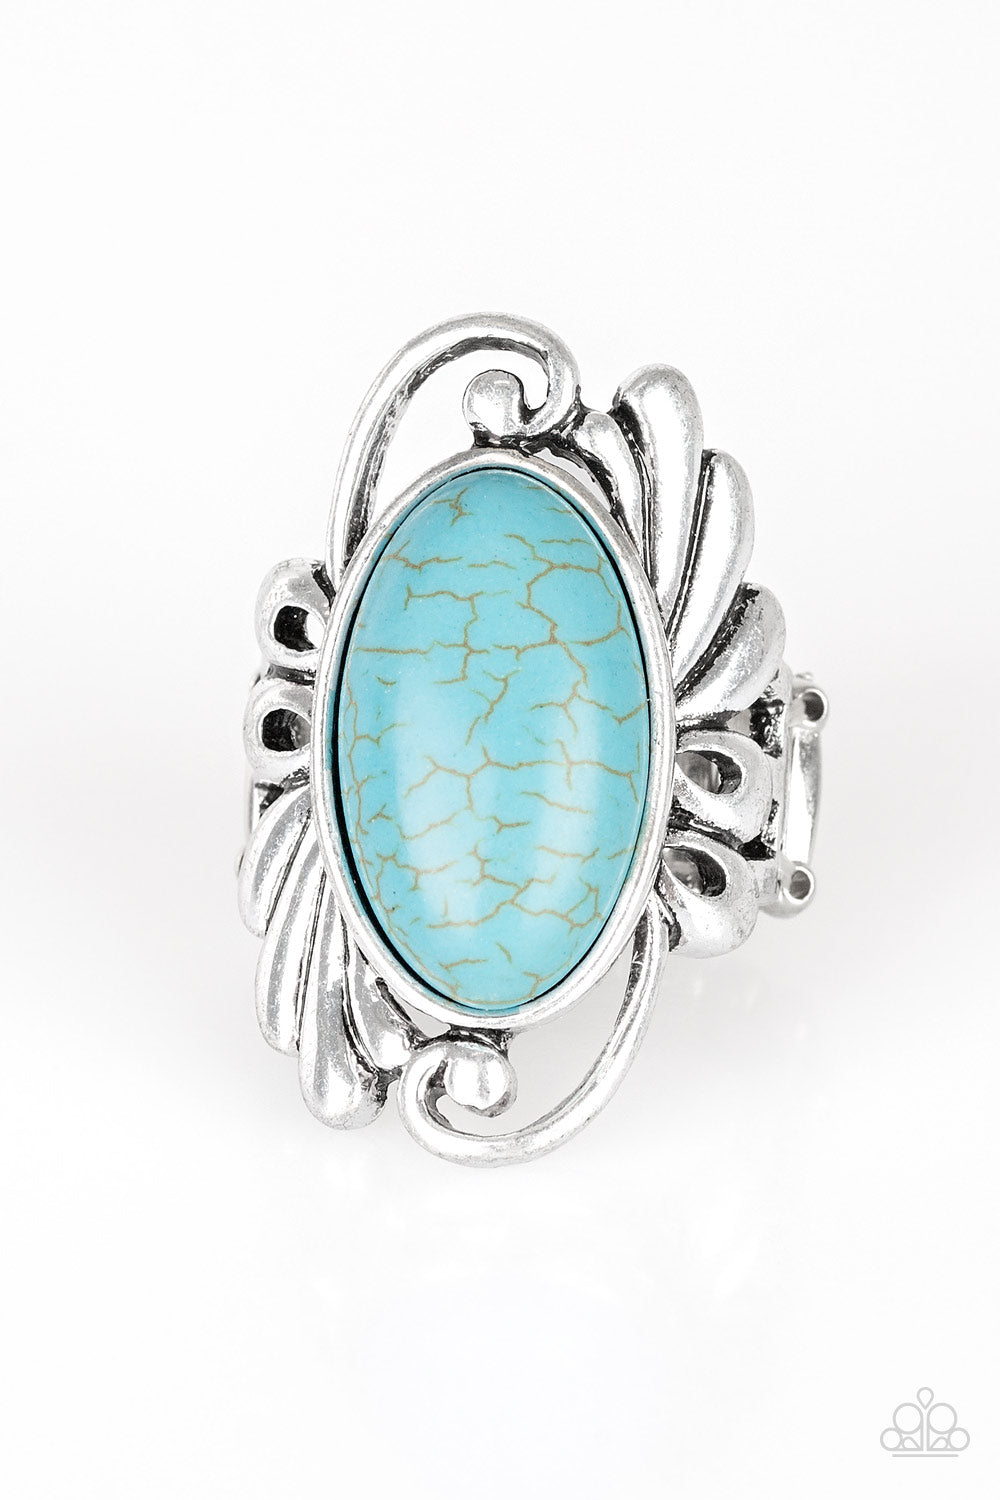 SEDONA SUNDET - Paparazzi - Chiseled into a smooth oval, a refreshing turquoise stone is pressed into the center of a glistening silver frame radiating with filigree detail. Features a stretchy band for a flexible fit.